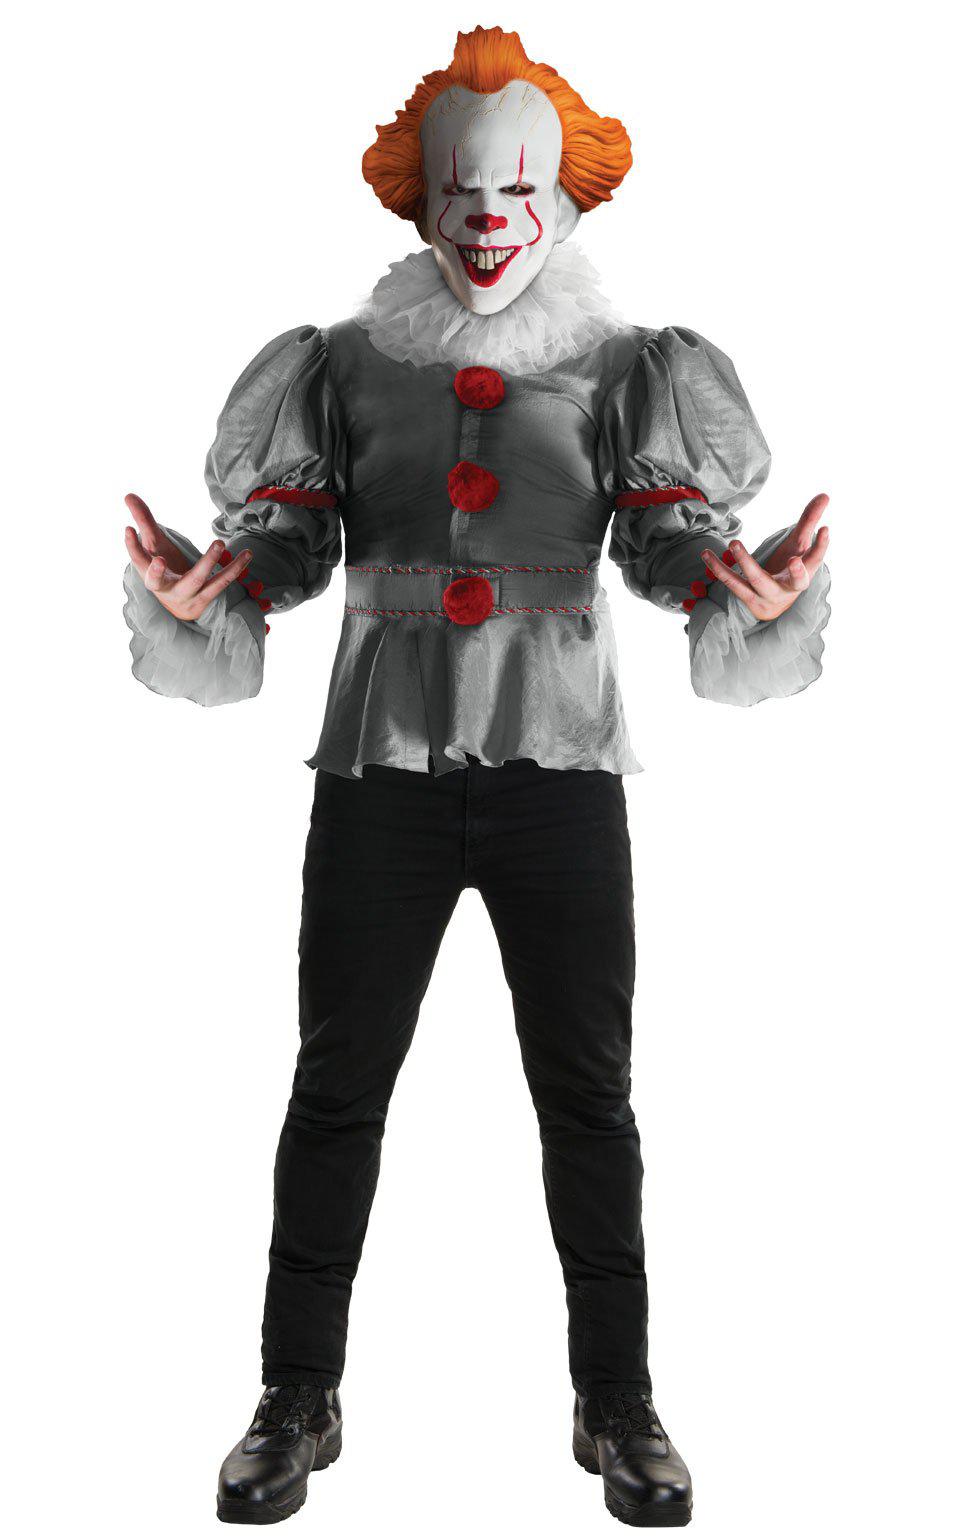 Pennywise 'It' Deluxe Costume Adult